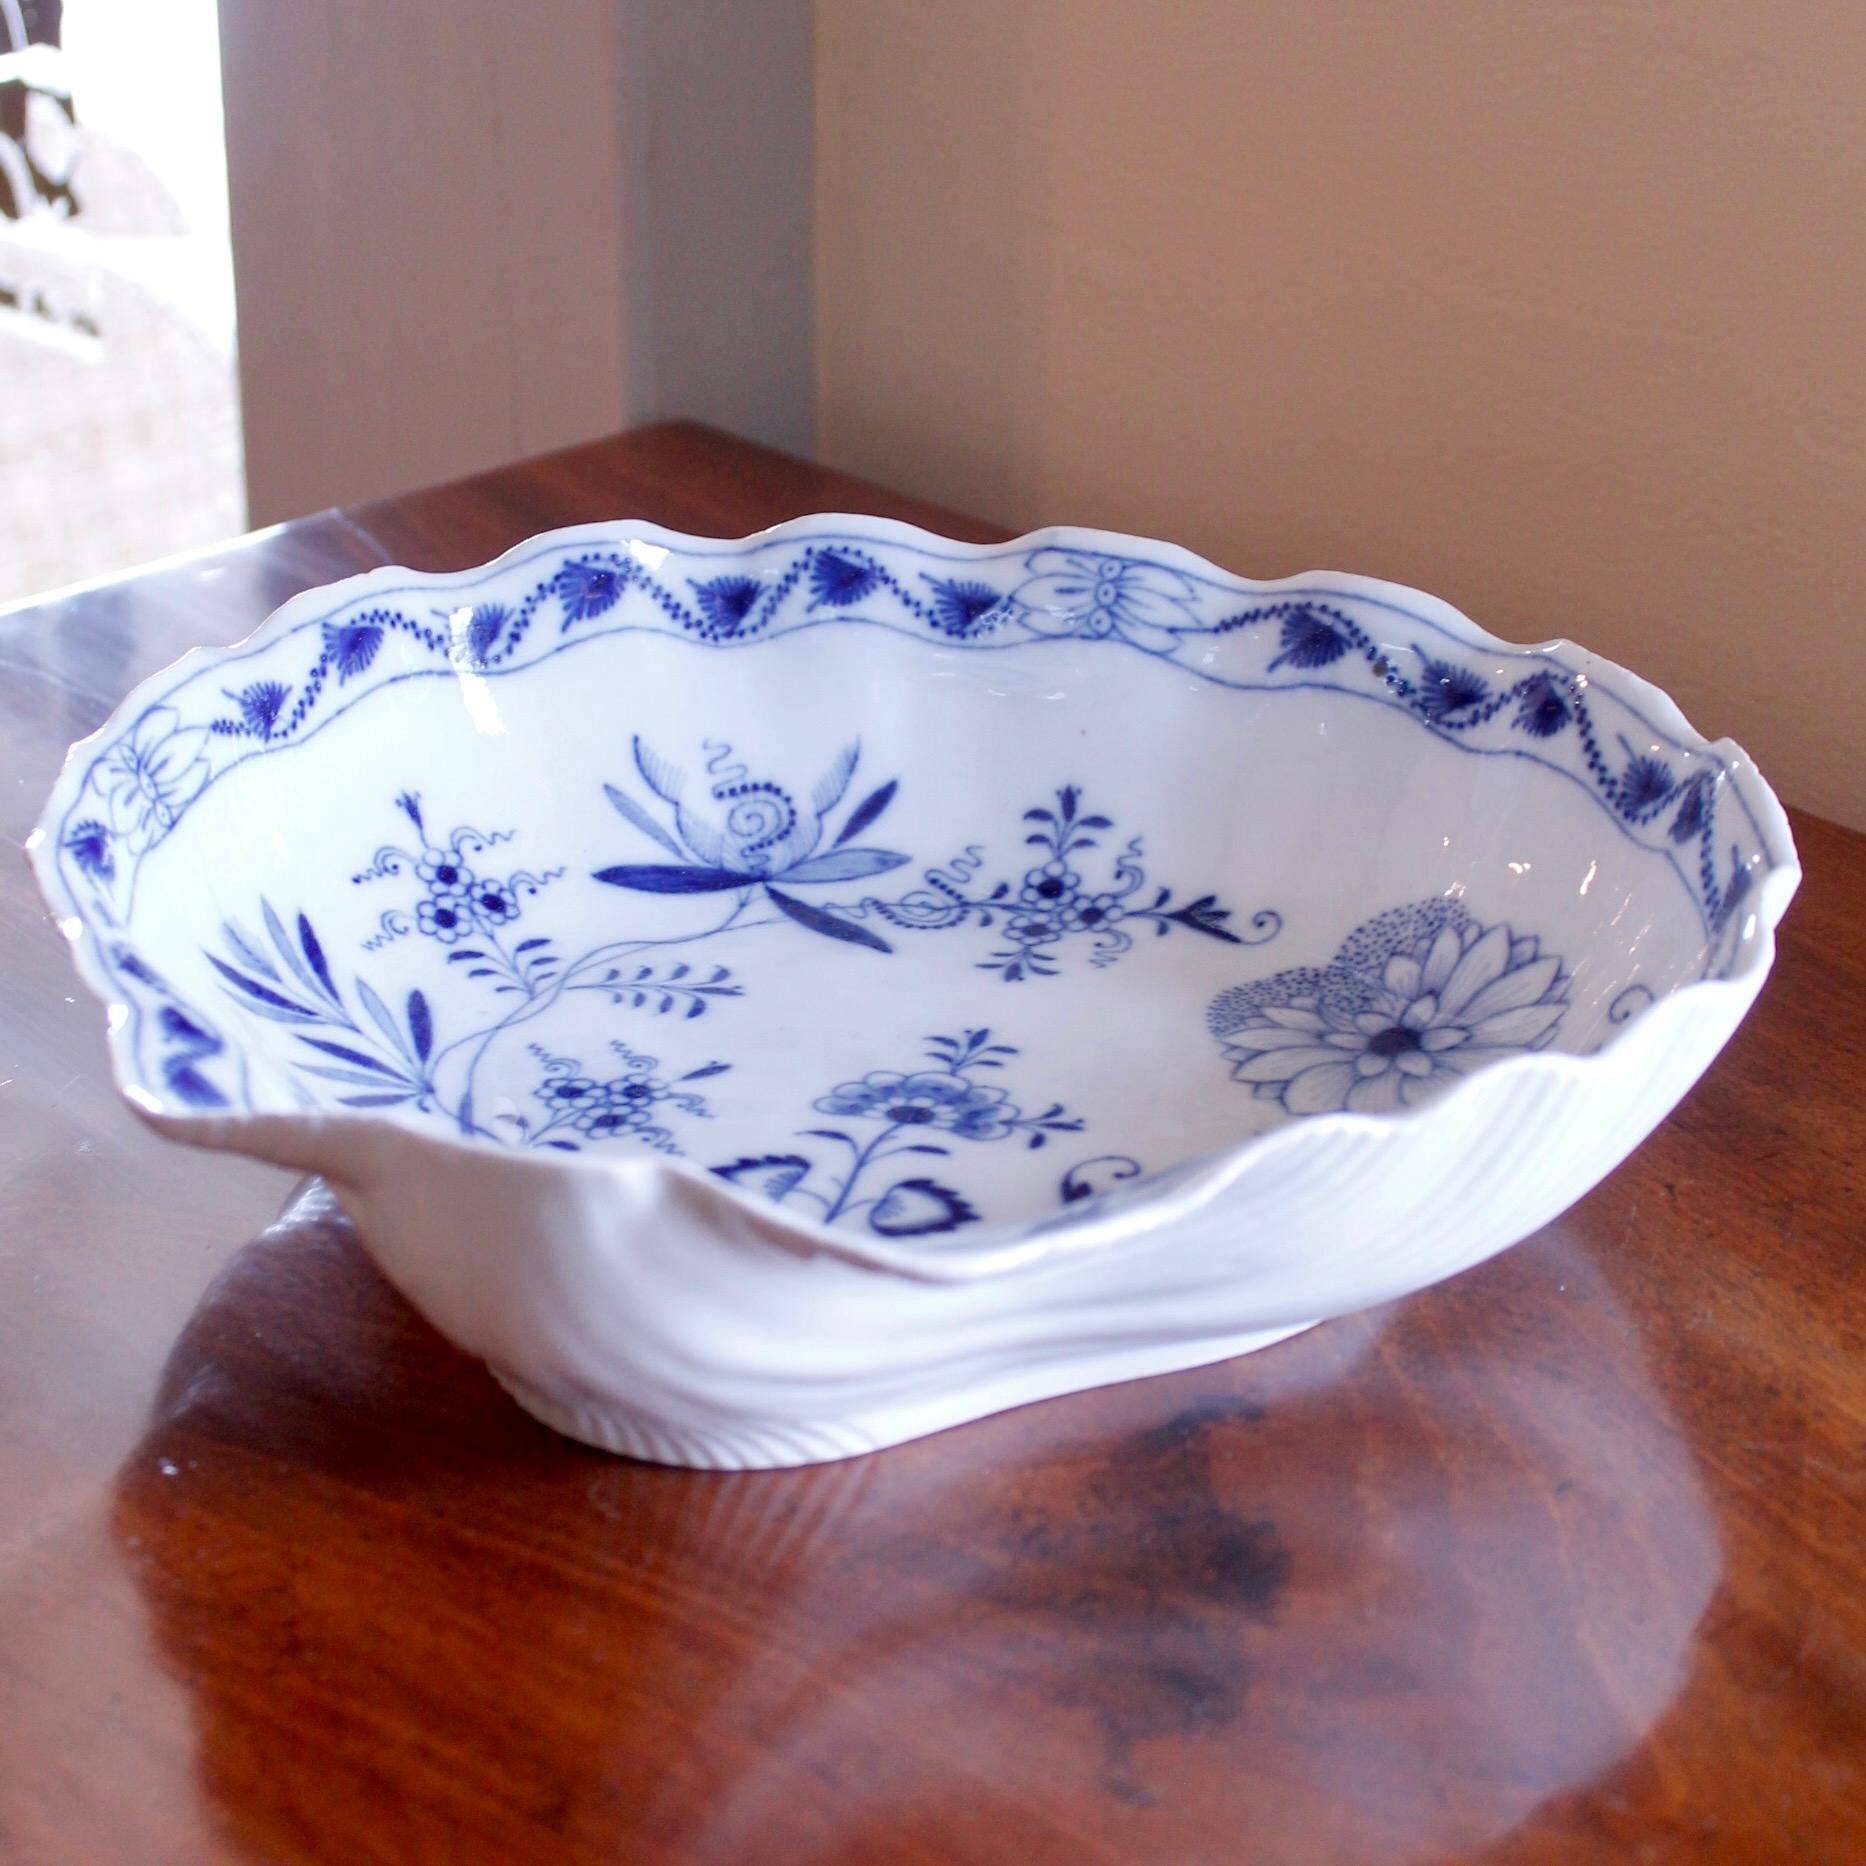 Glazed Large And Unusual Shell Shaped Antique Meissen Porcelain Bowl, 19th Century For Sale